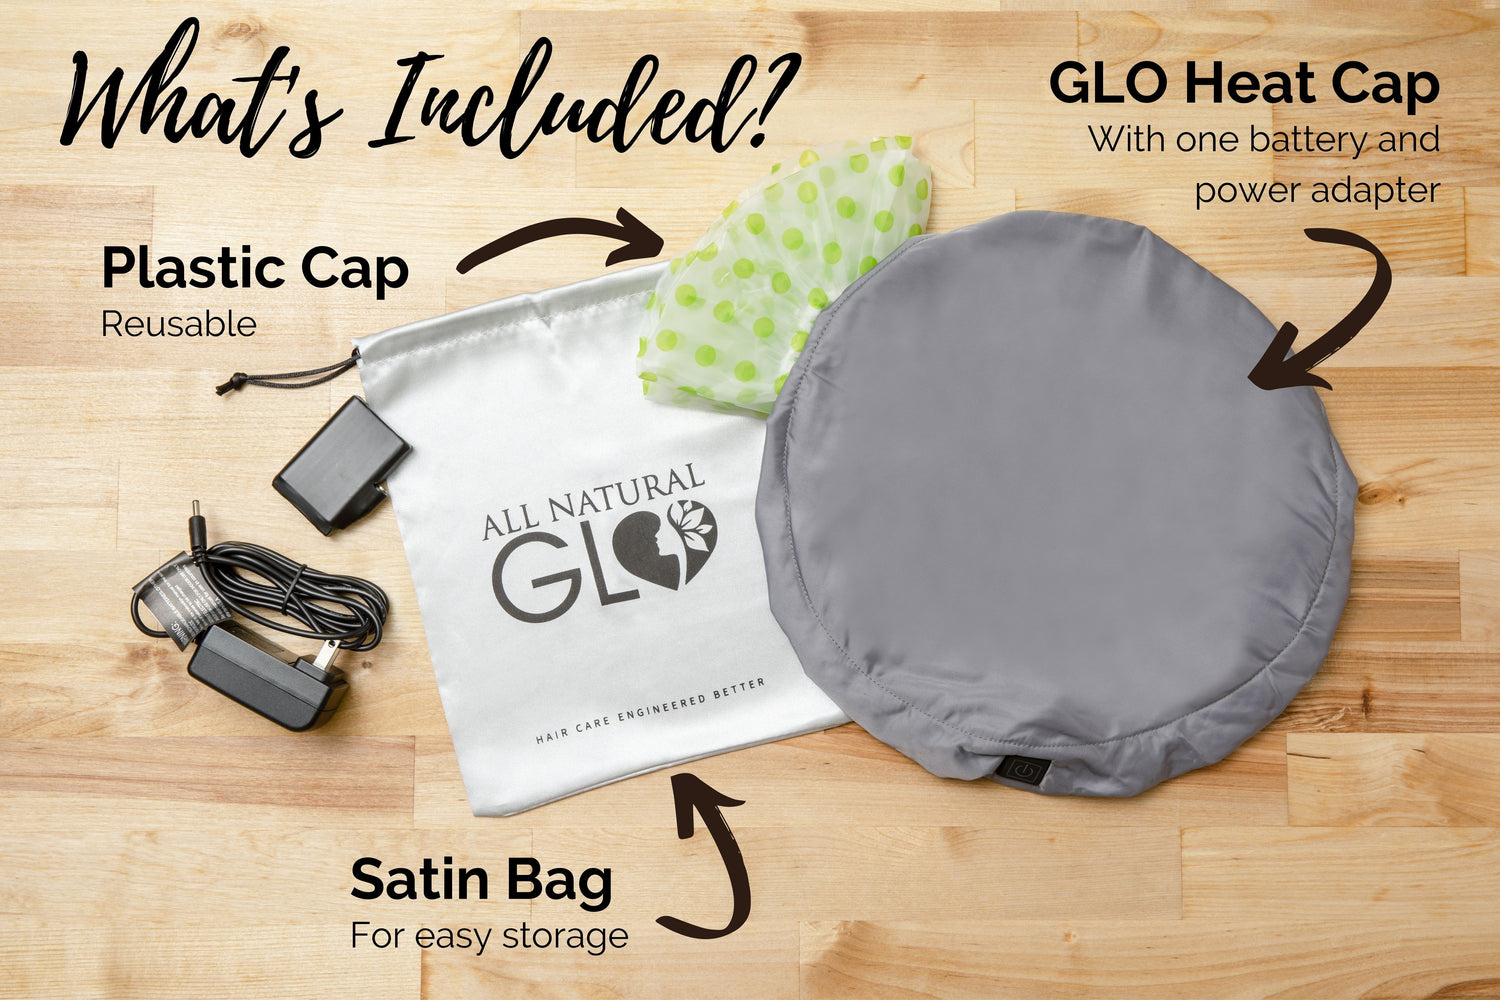 GLO Heat Cap - All Natural GLO